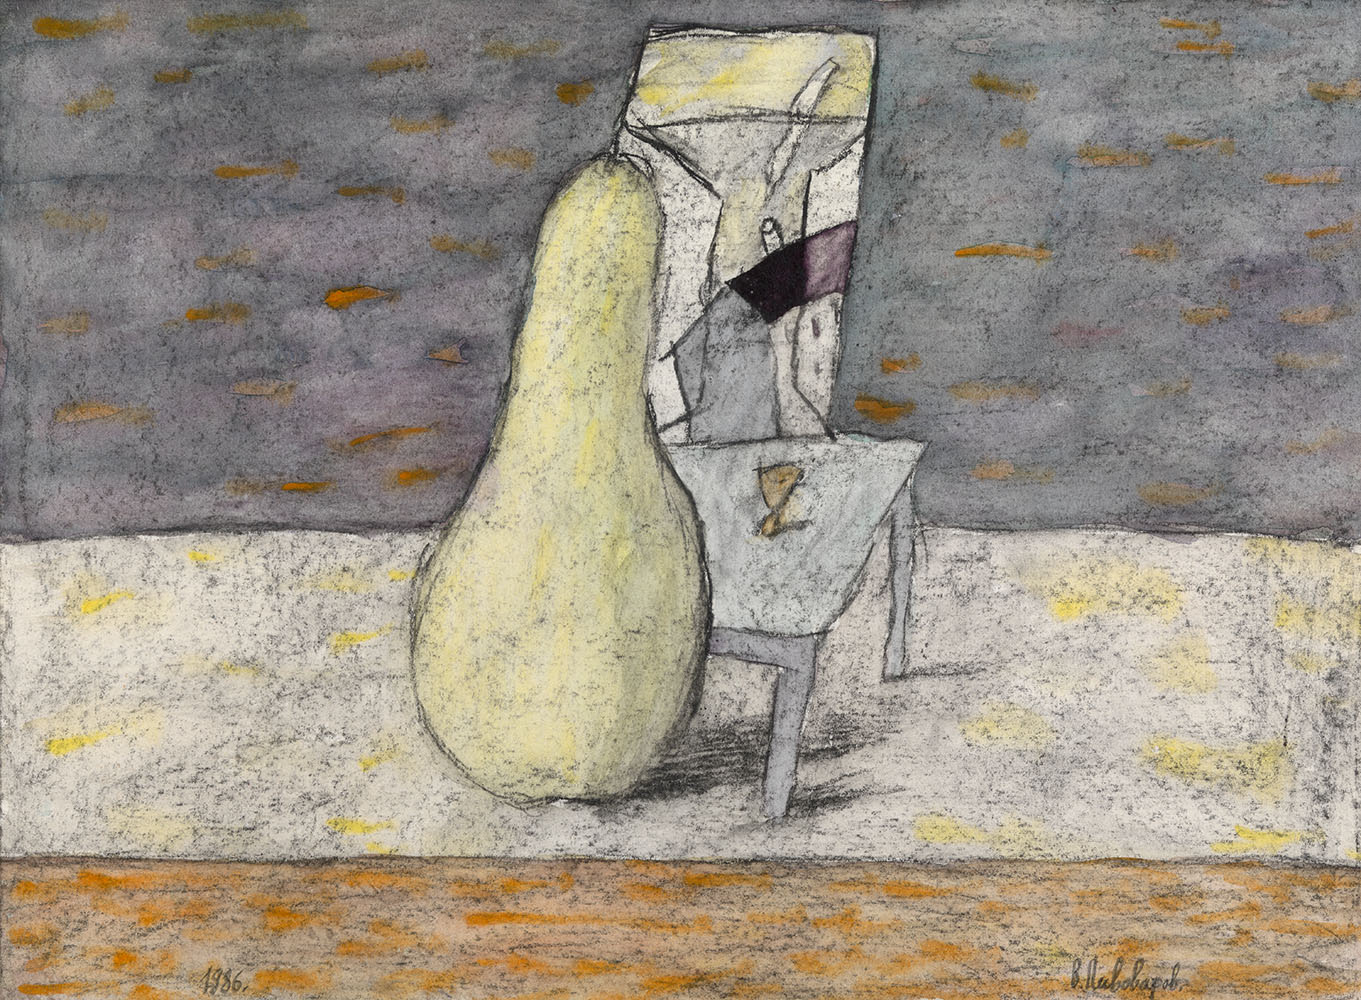 Untitled, Composition with a Pear and Composition with a House